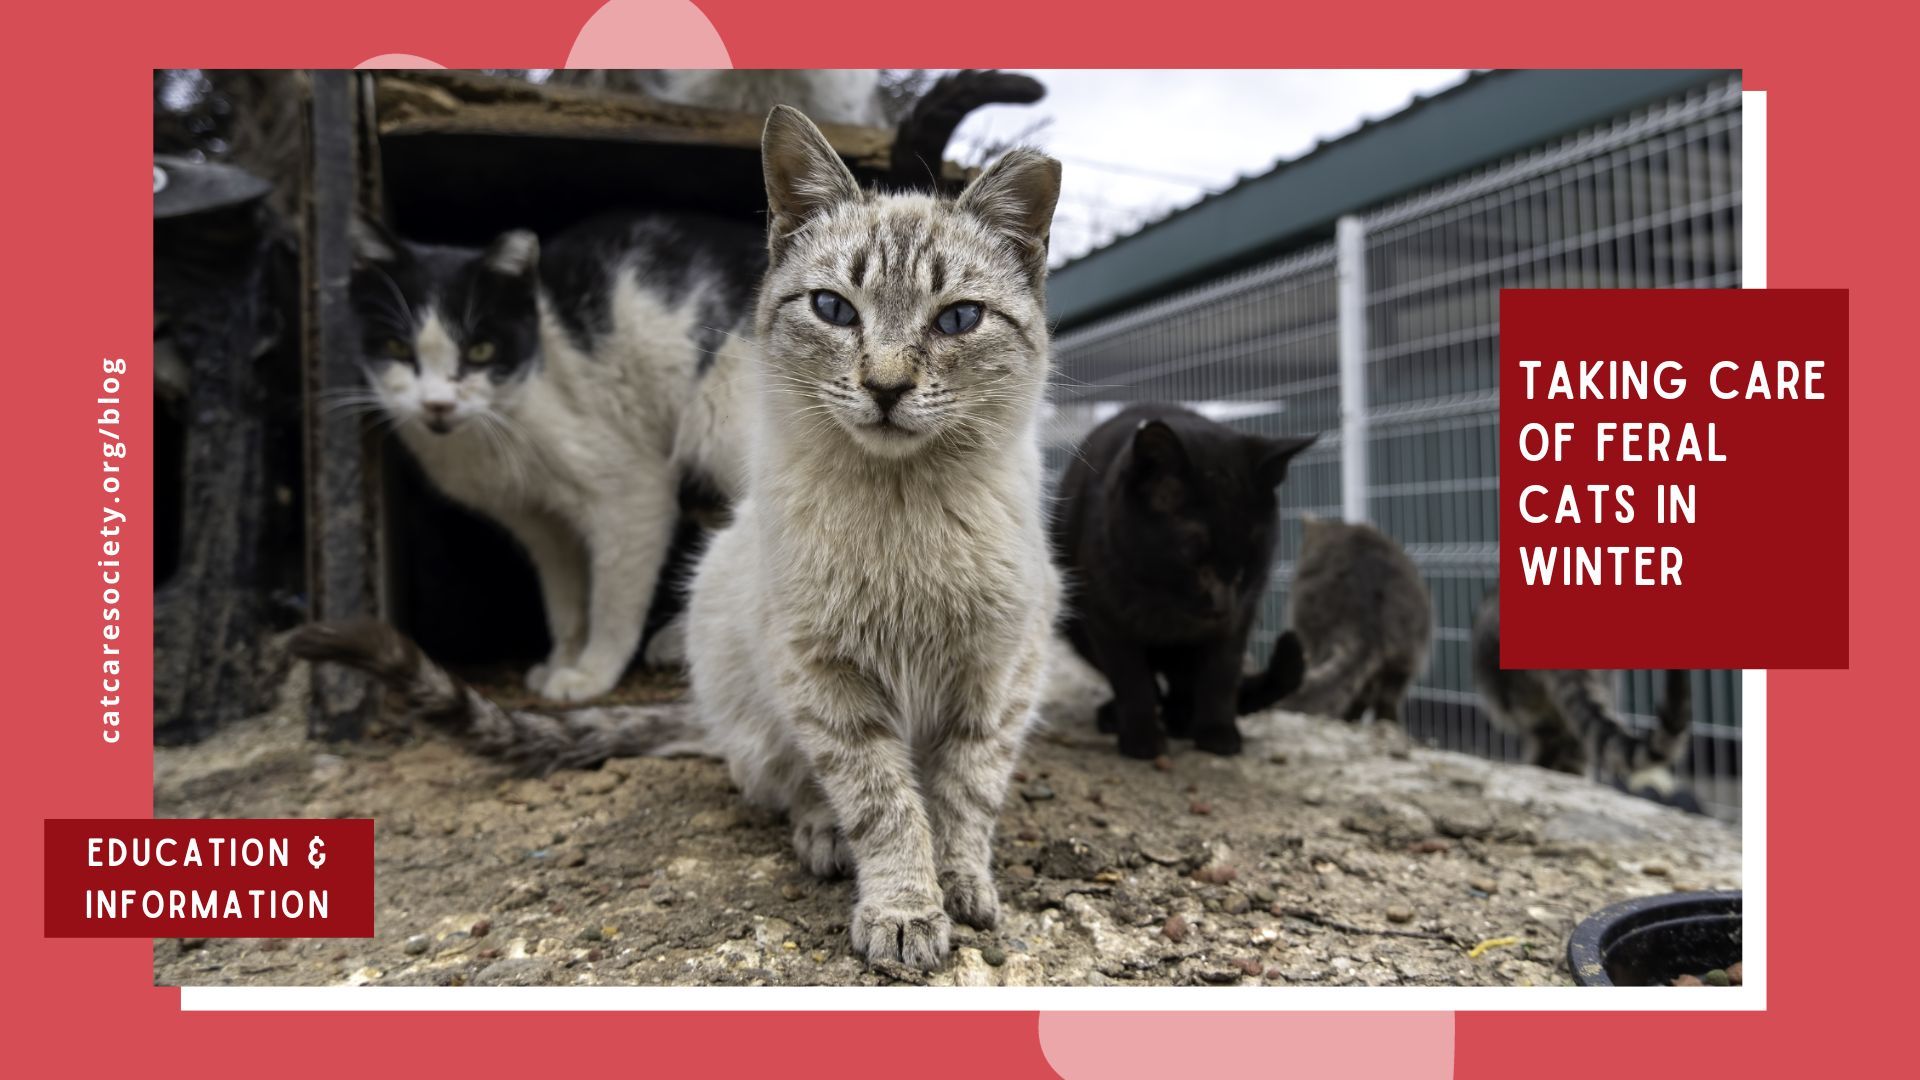 How to Care for Local Feral Cats in Your Community in Winter